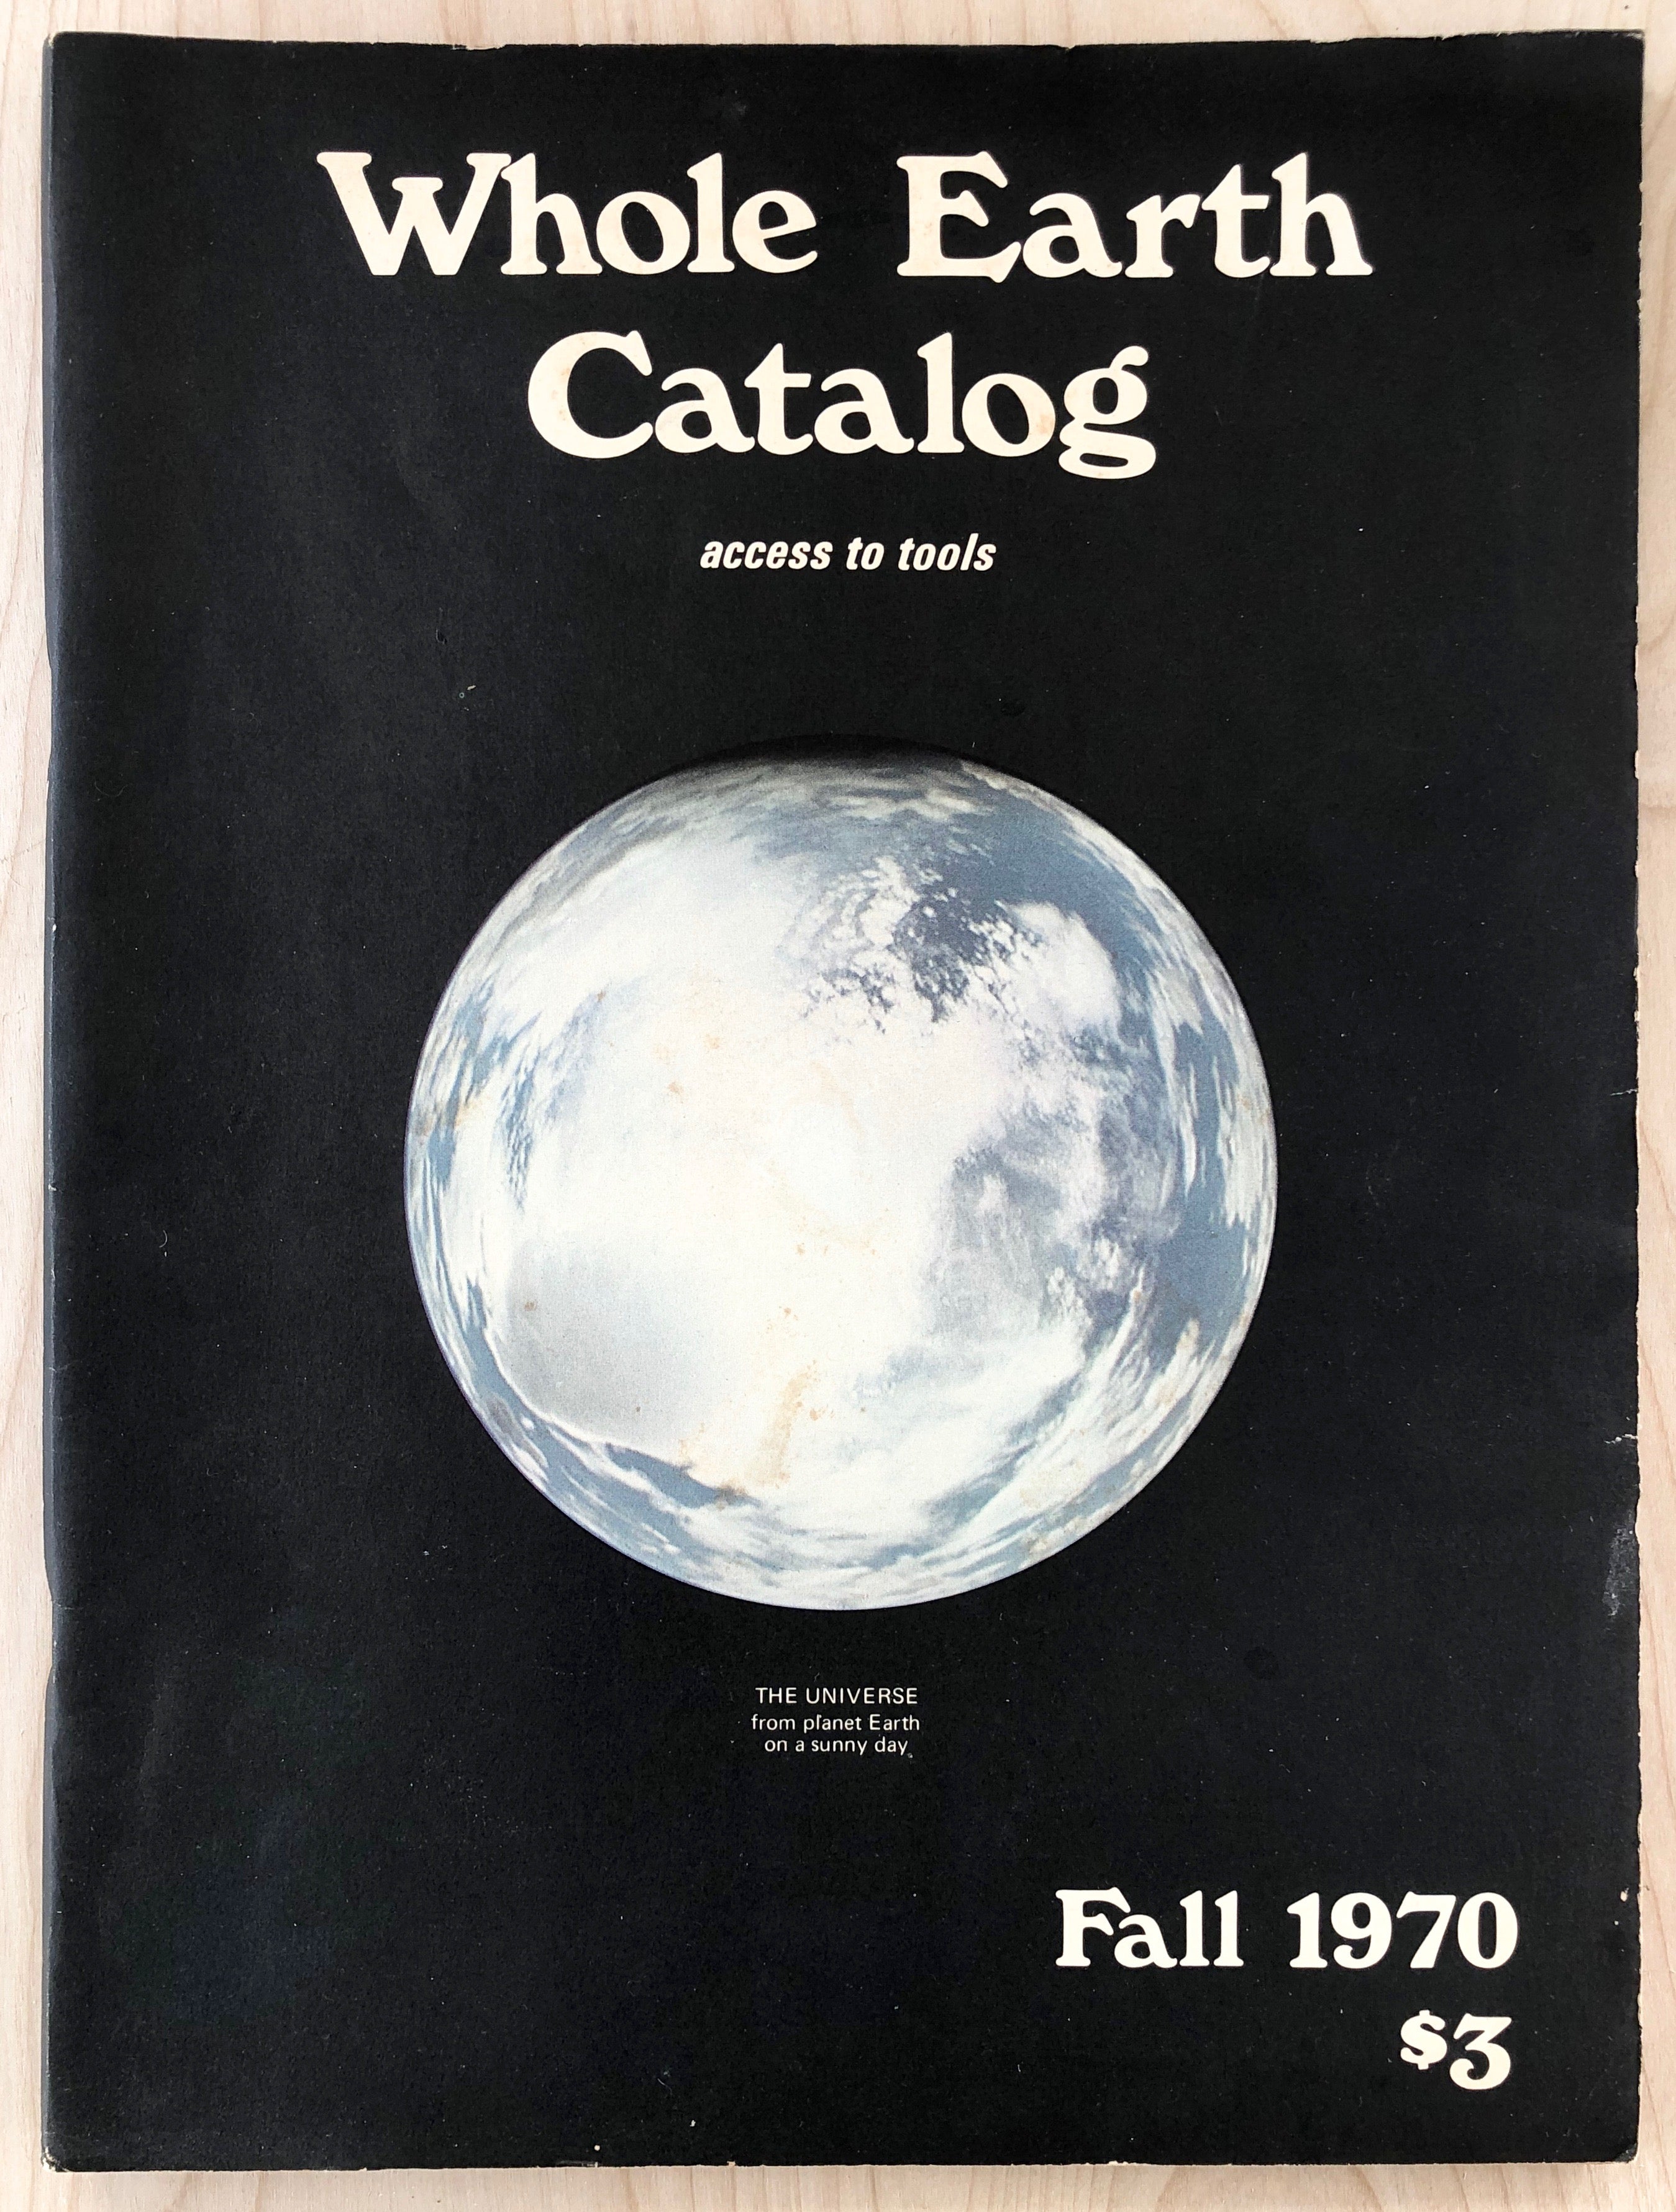 WHOLE EARTH CATALOG: ACCESS TO TOOLS (FALL 1970), edited by